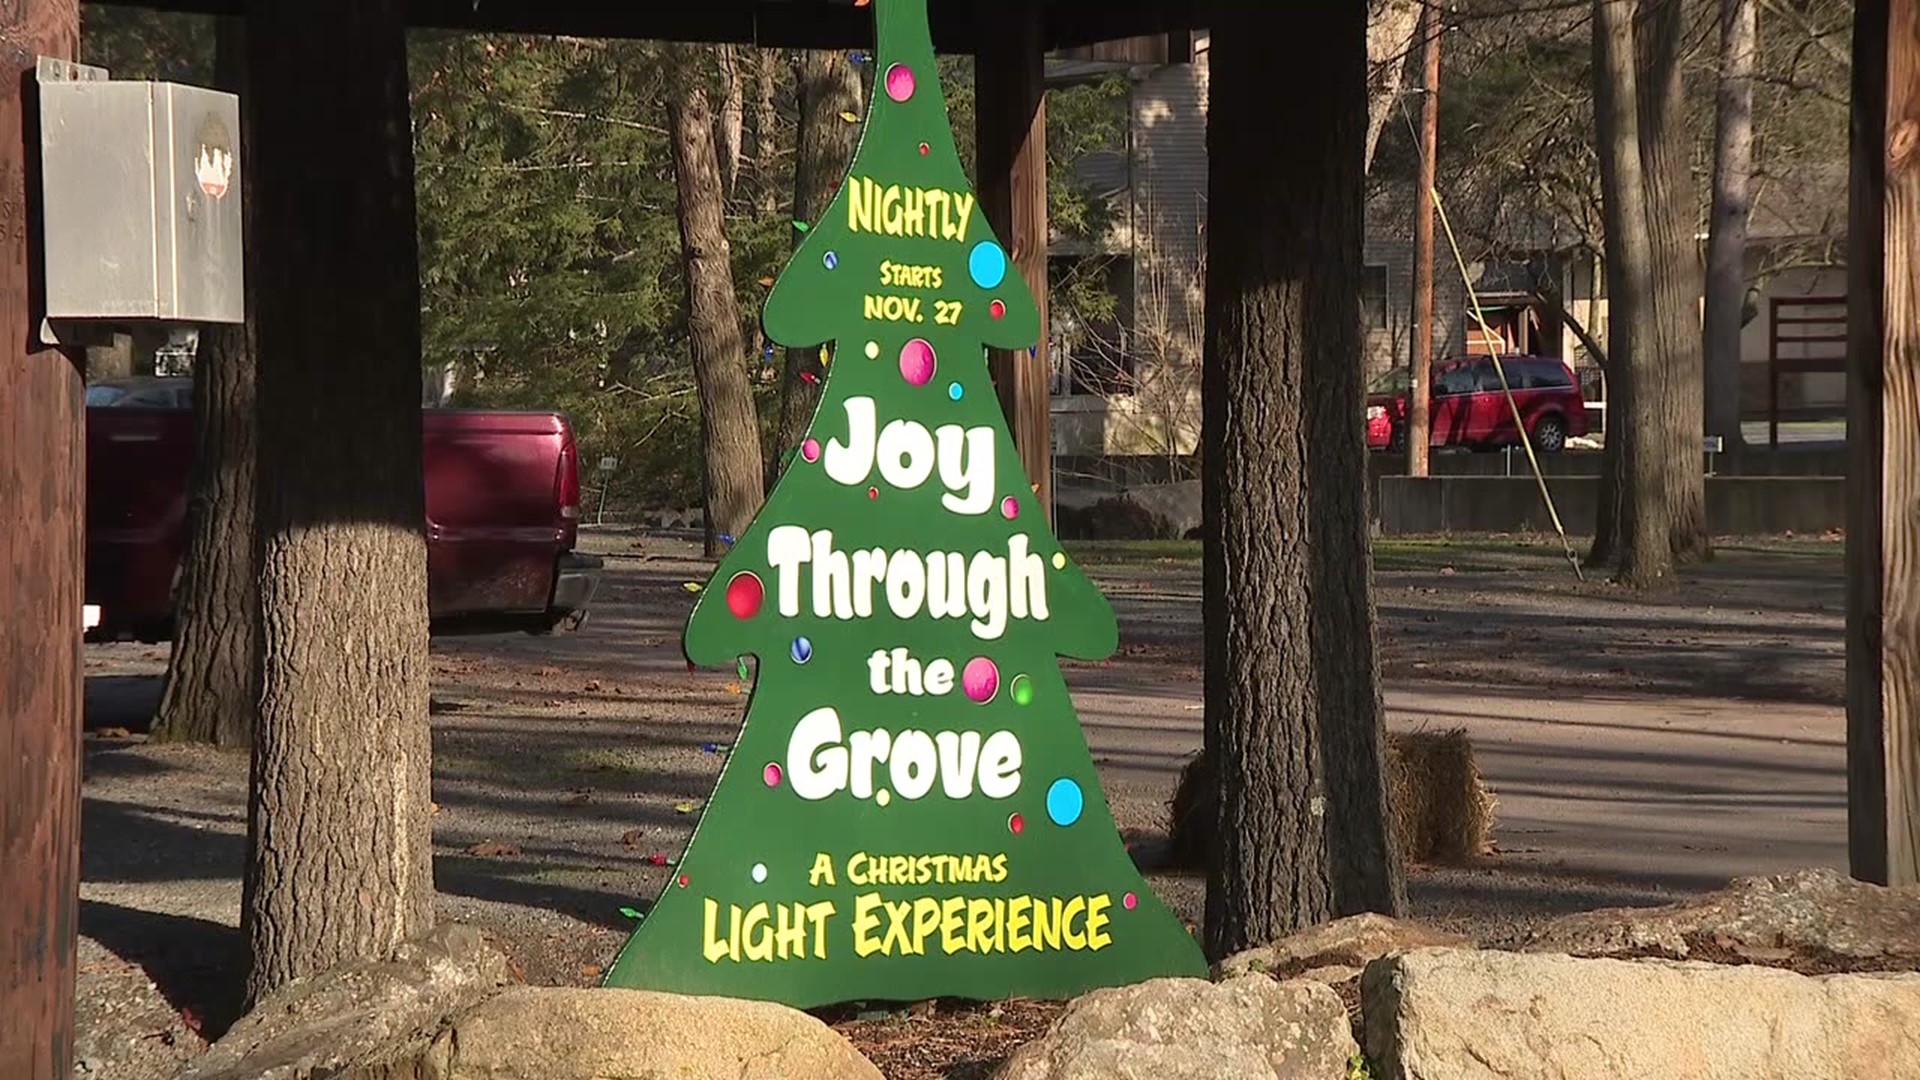 A new holiday attraction opens Friday at Knoebels Amusement Resort.